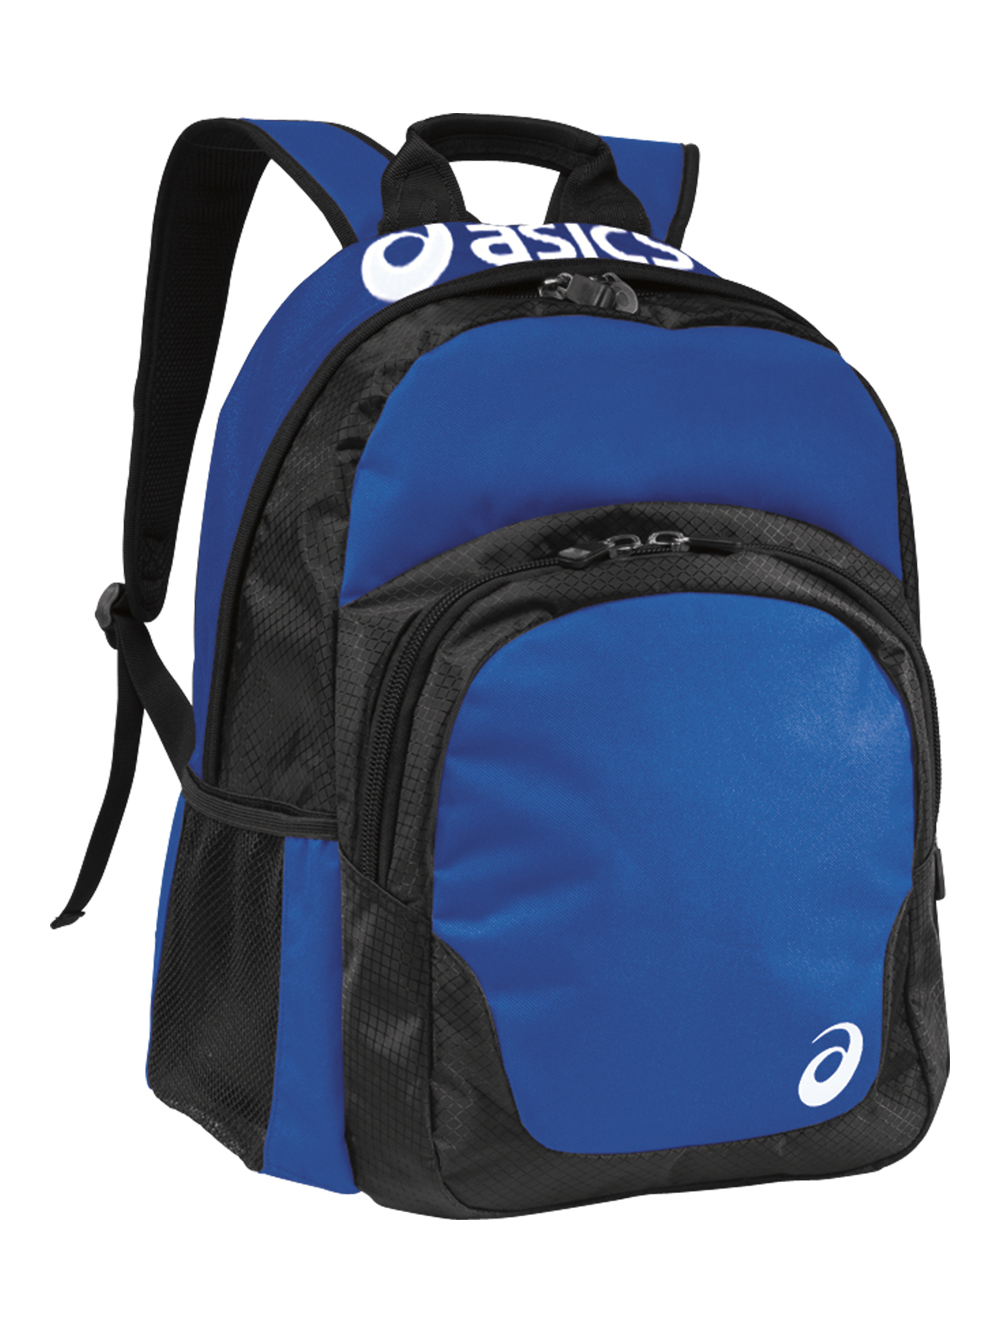 Asics Team Backpack | Midwest Volleyball